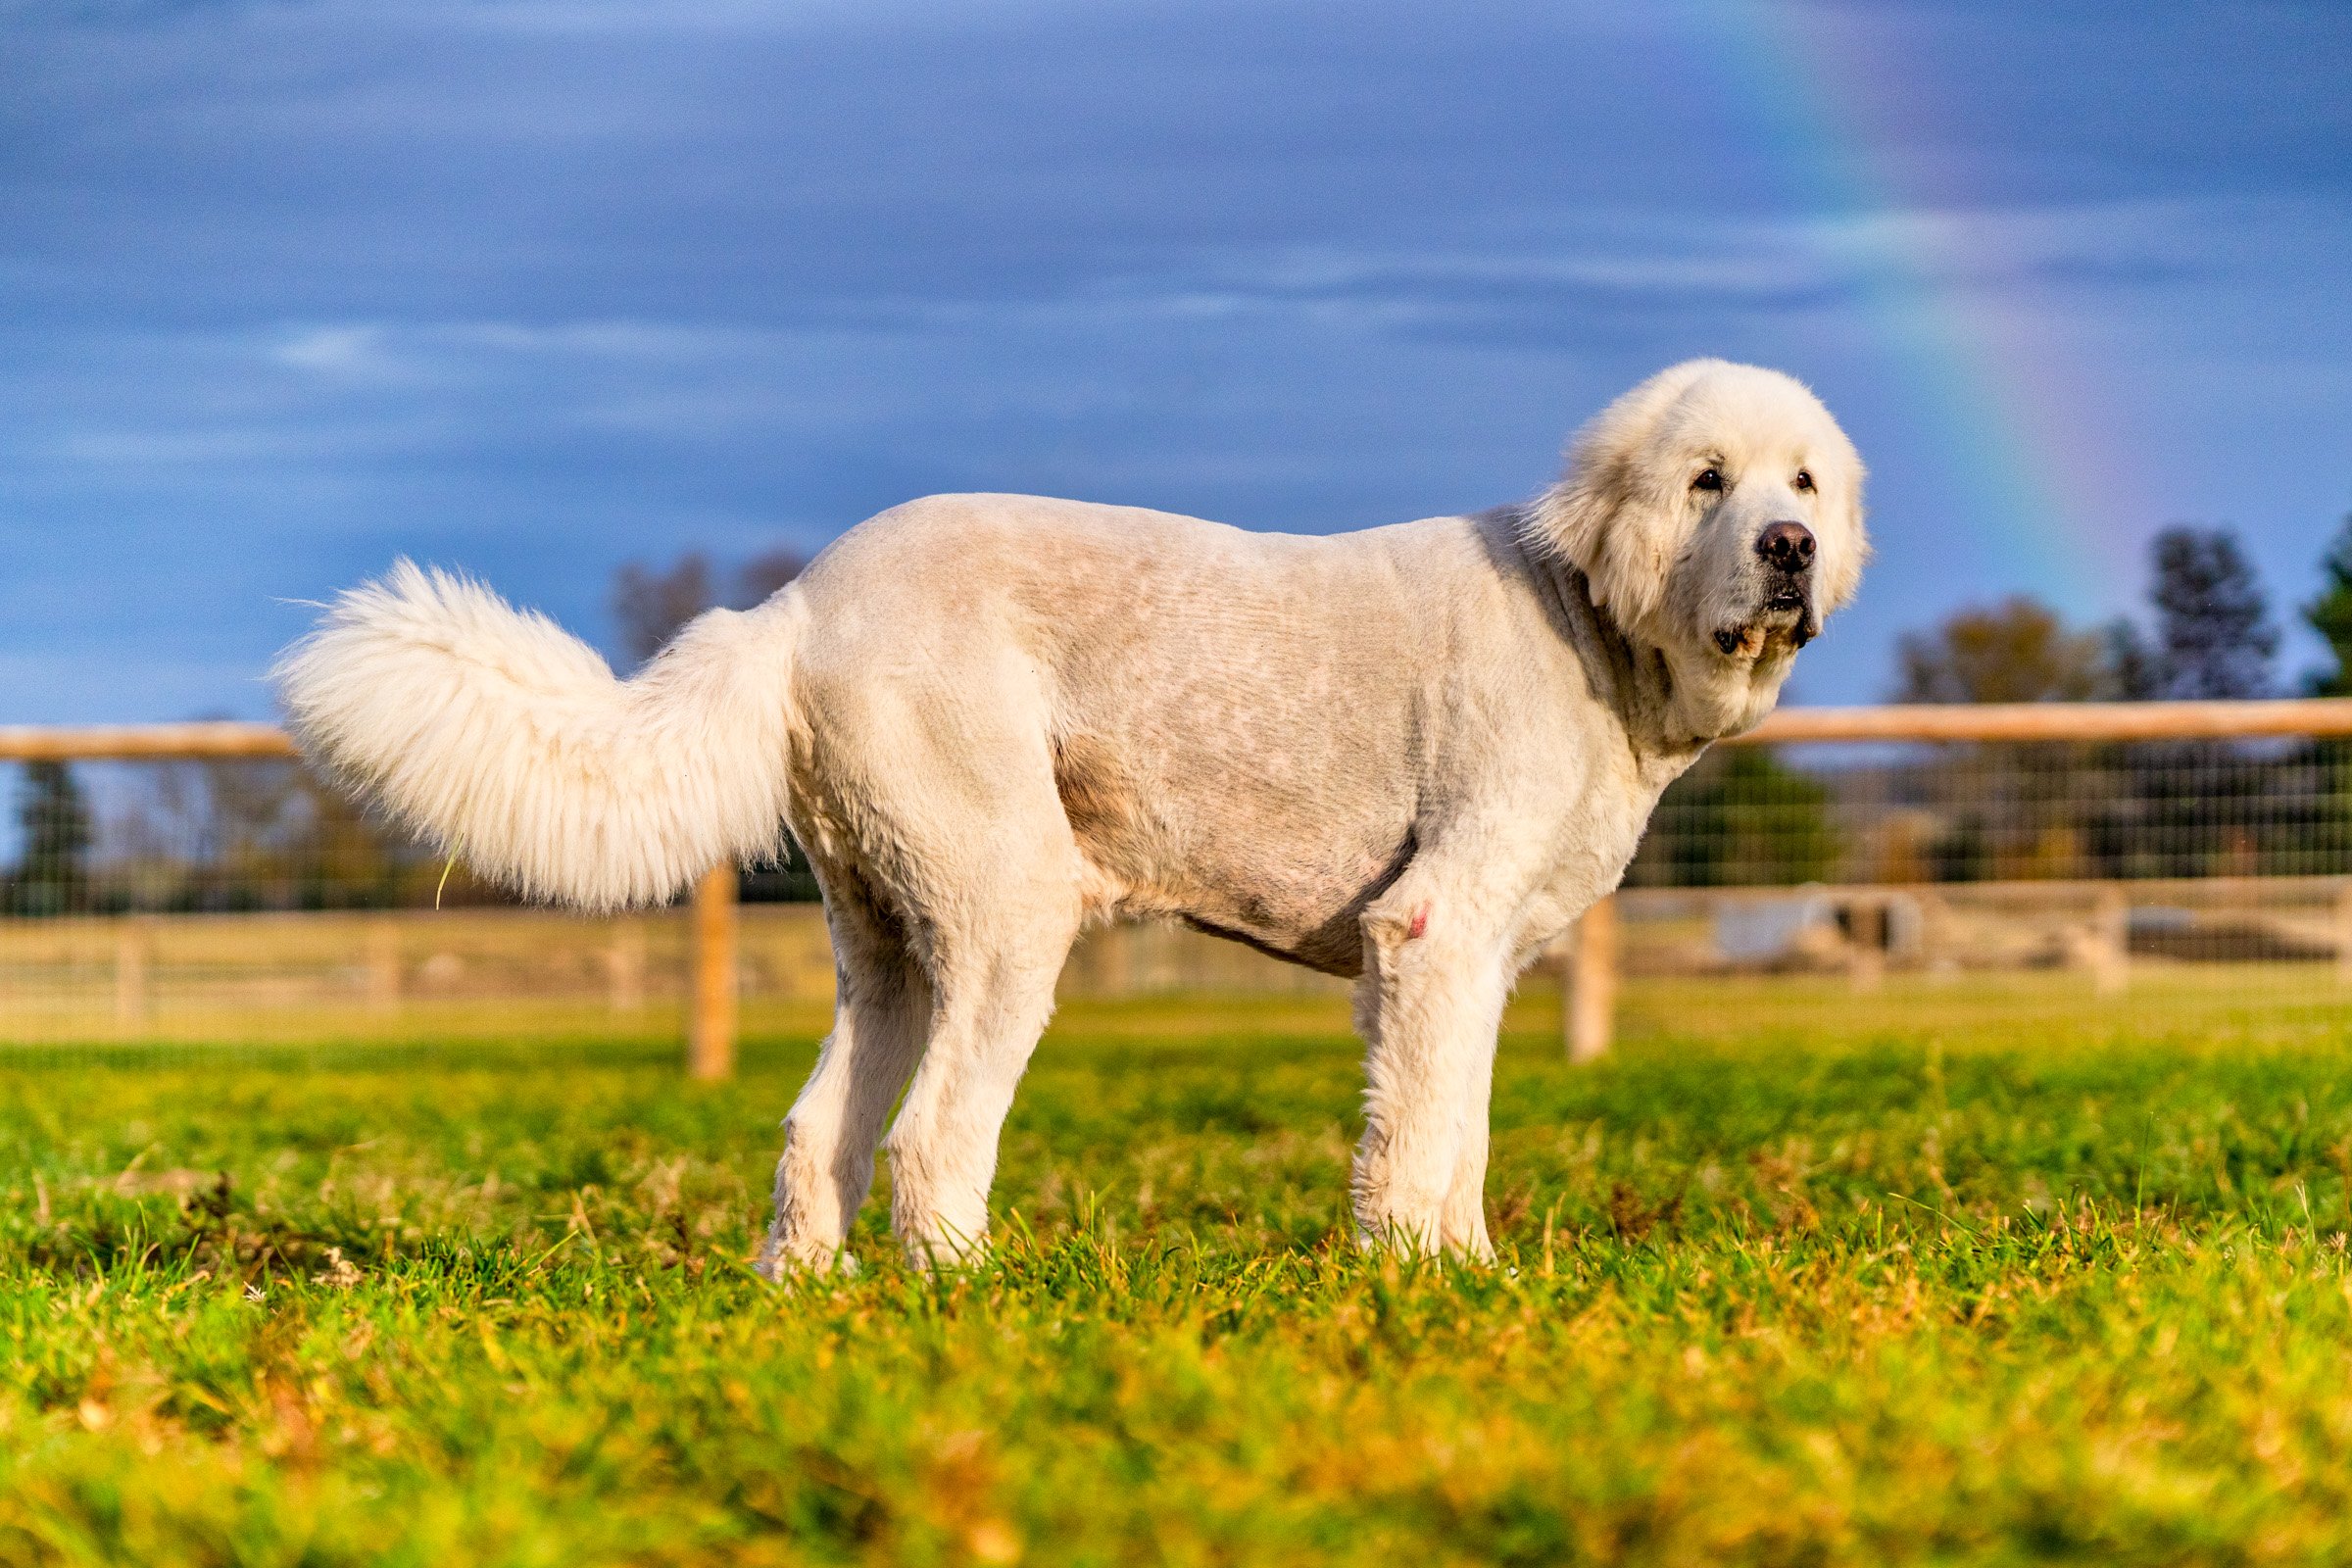 108_Pet Photography_Dogs Horses Fish_Photography by Wasim Muklashy_2400px_web.jpg